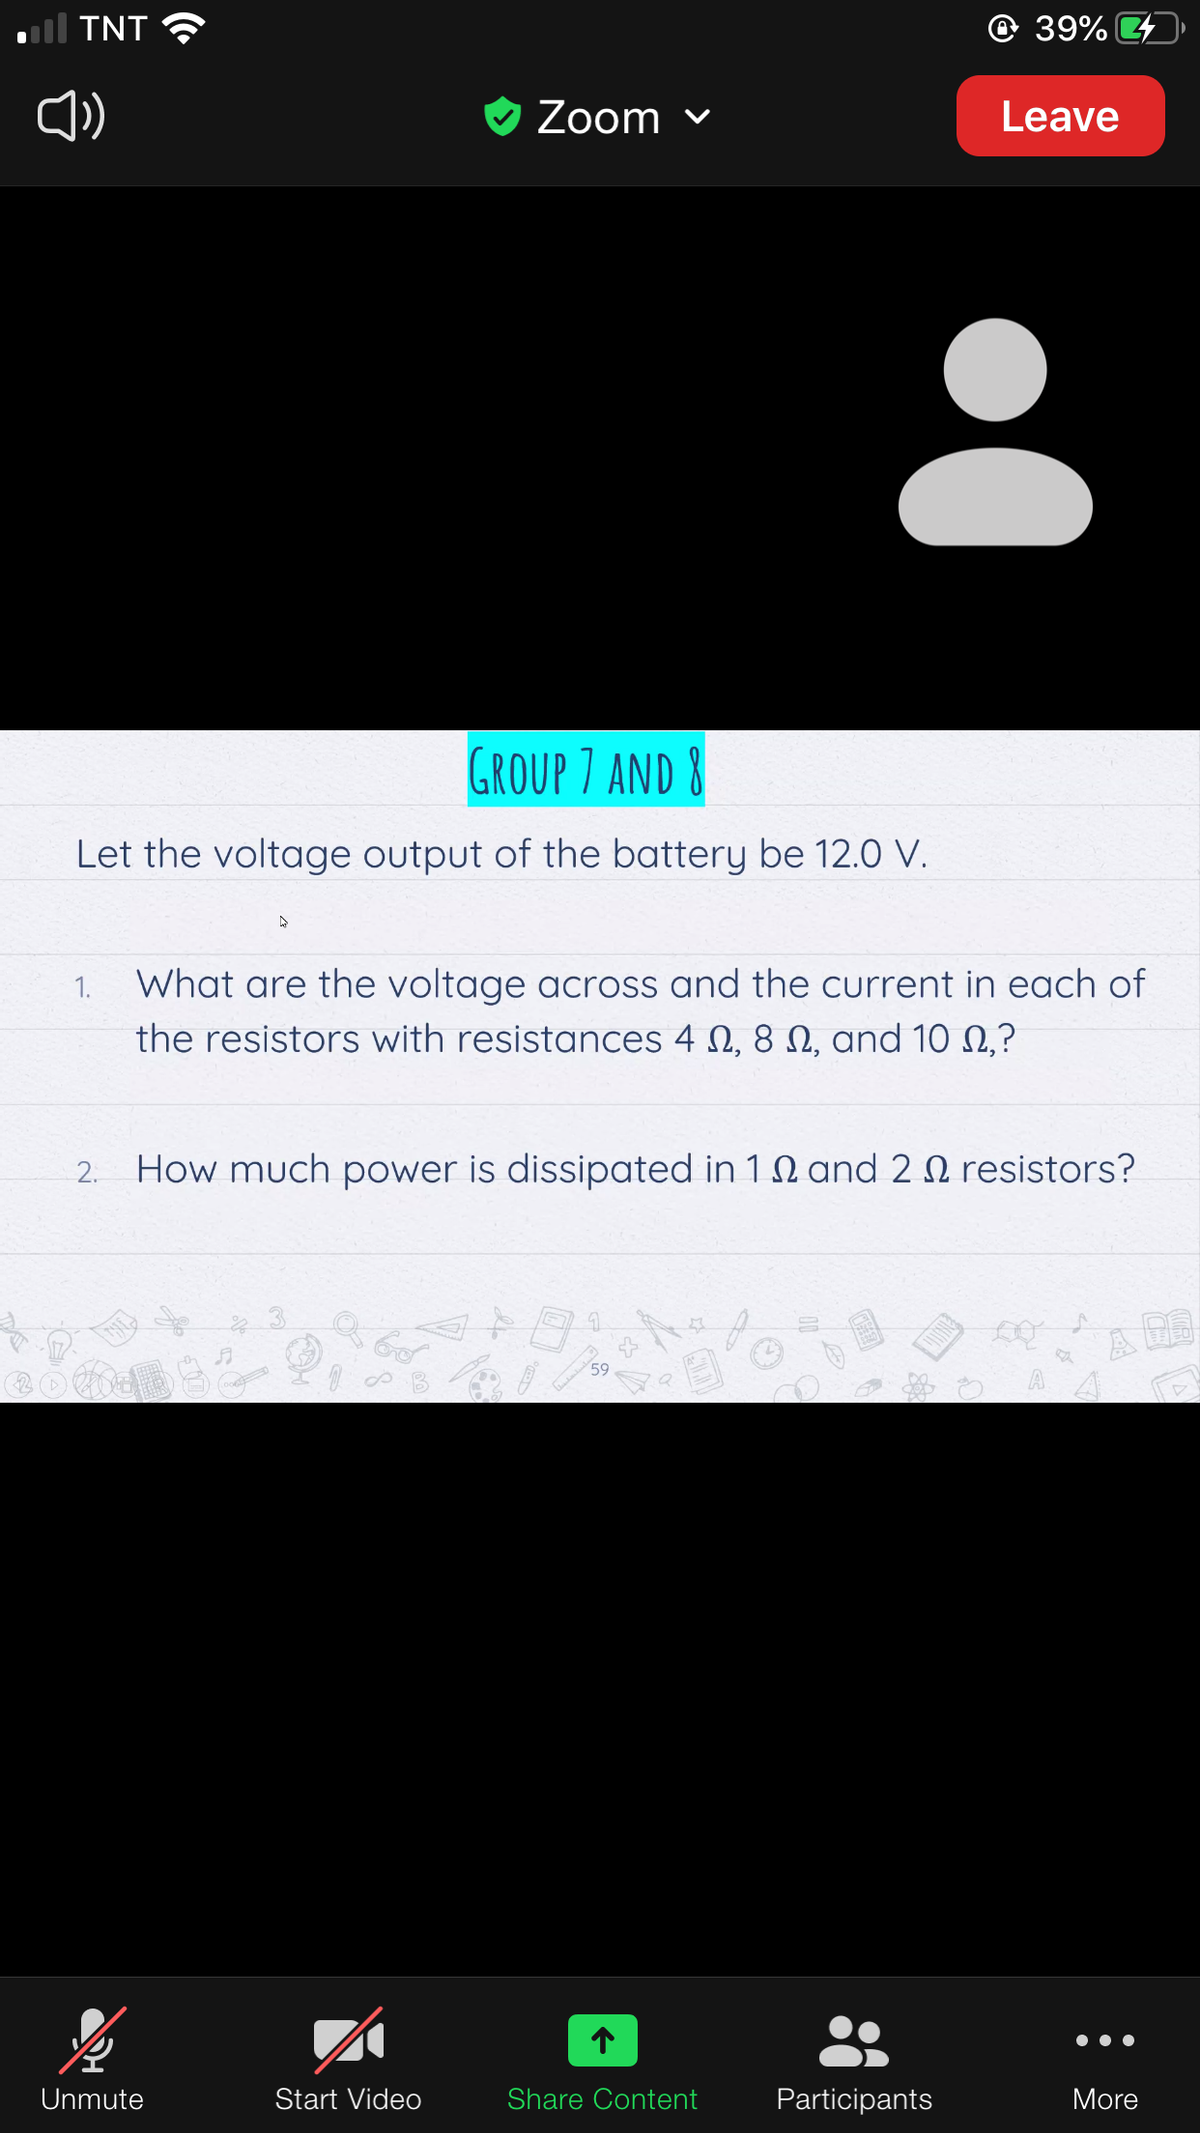 ll TNT
© 39%
O Zoom v
Leave
GROUP 7 AND 8
Let the voltage output of the battery be 12.O V.
1.
What are the voltage across and the current in each of
the resistors with resistances 4 N, 8 N, and 10 N,?
2.
How much power is dissipated in 1 N and 2 N resistors?
A DE
59
Unmute
Start Video
Share Content
Participants
More
